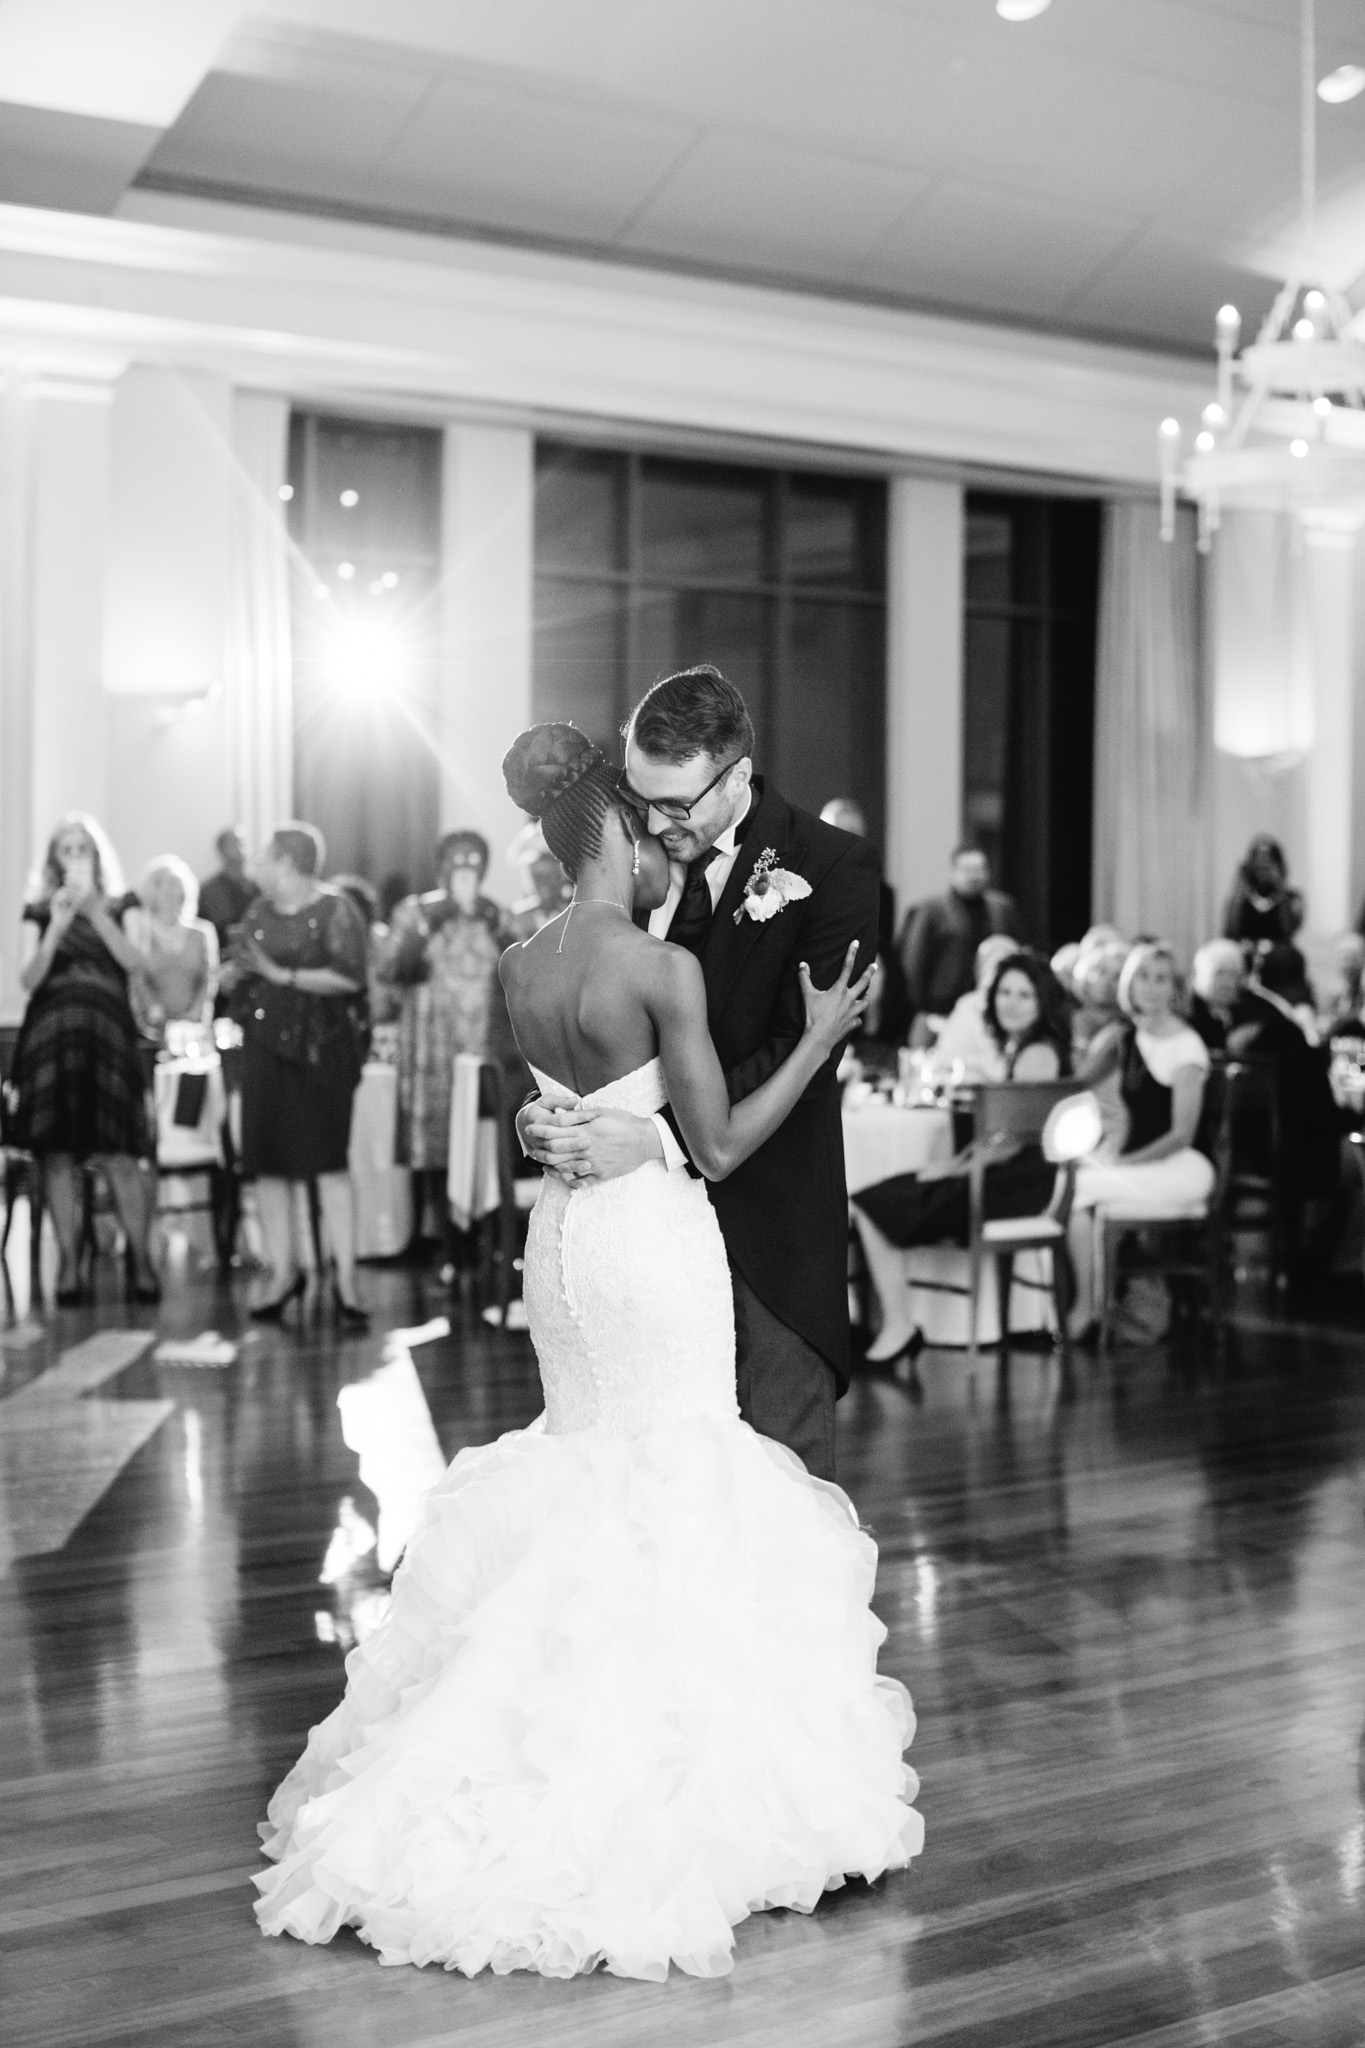 Bride and Groom first dance at the Atlanta History Center. Photo by Rebecca Cerasani.